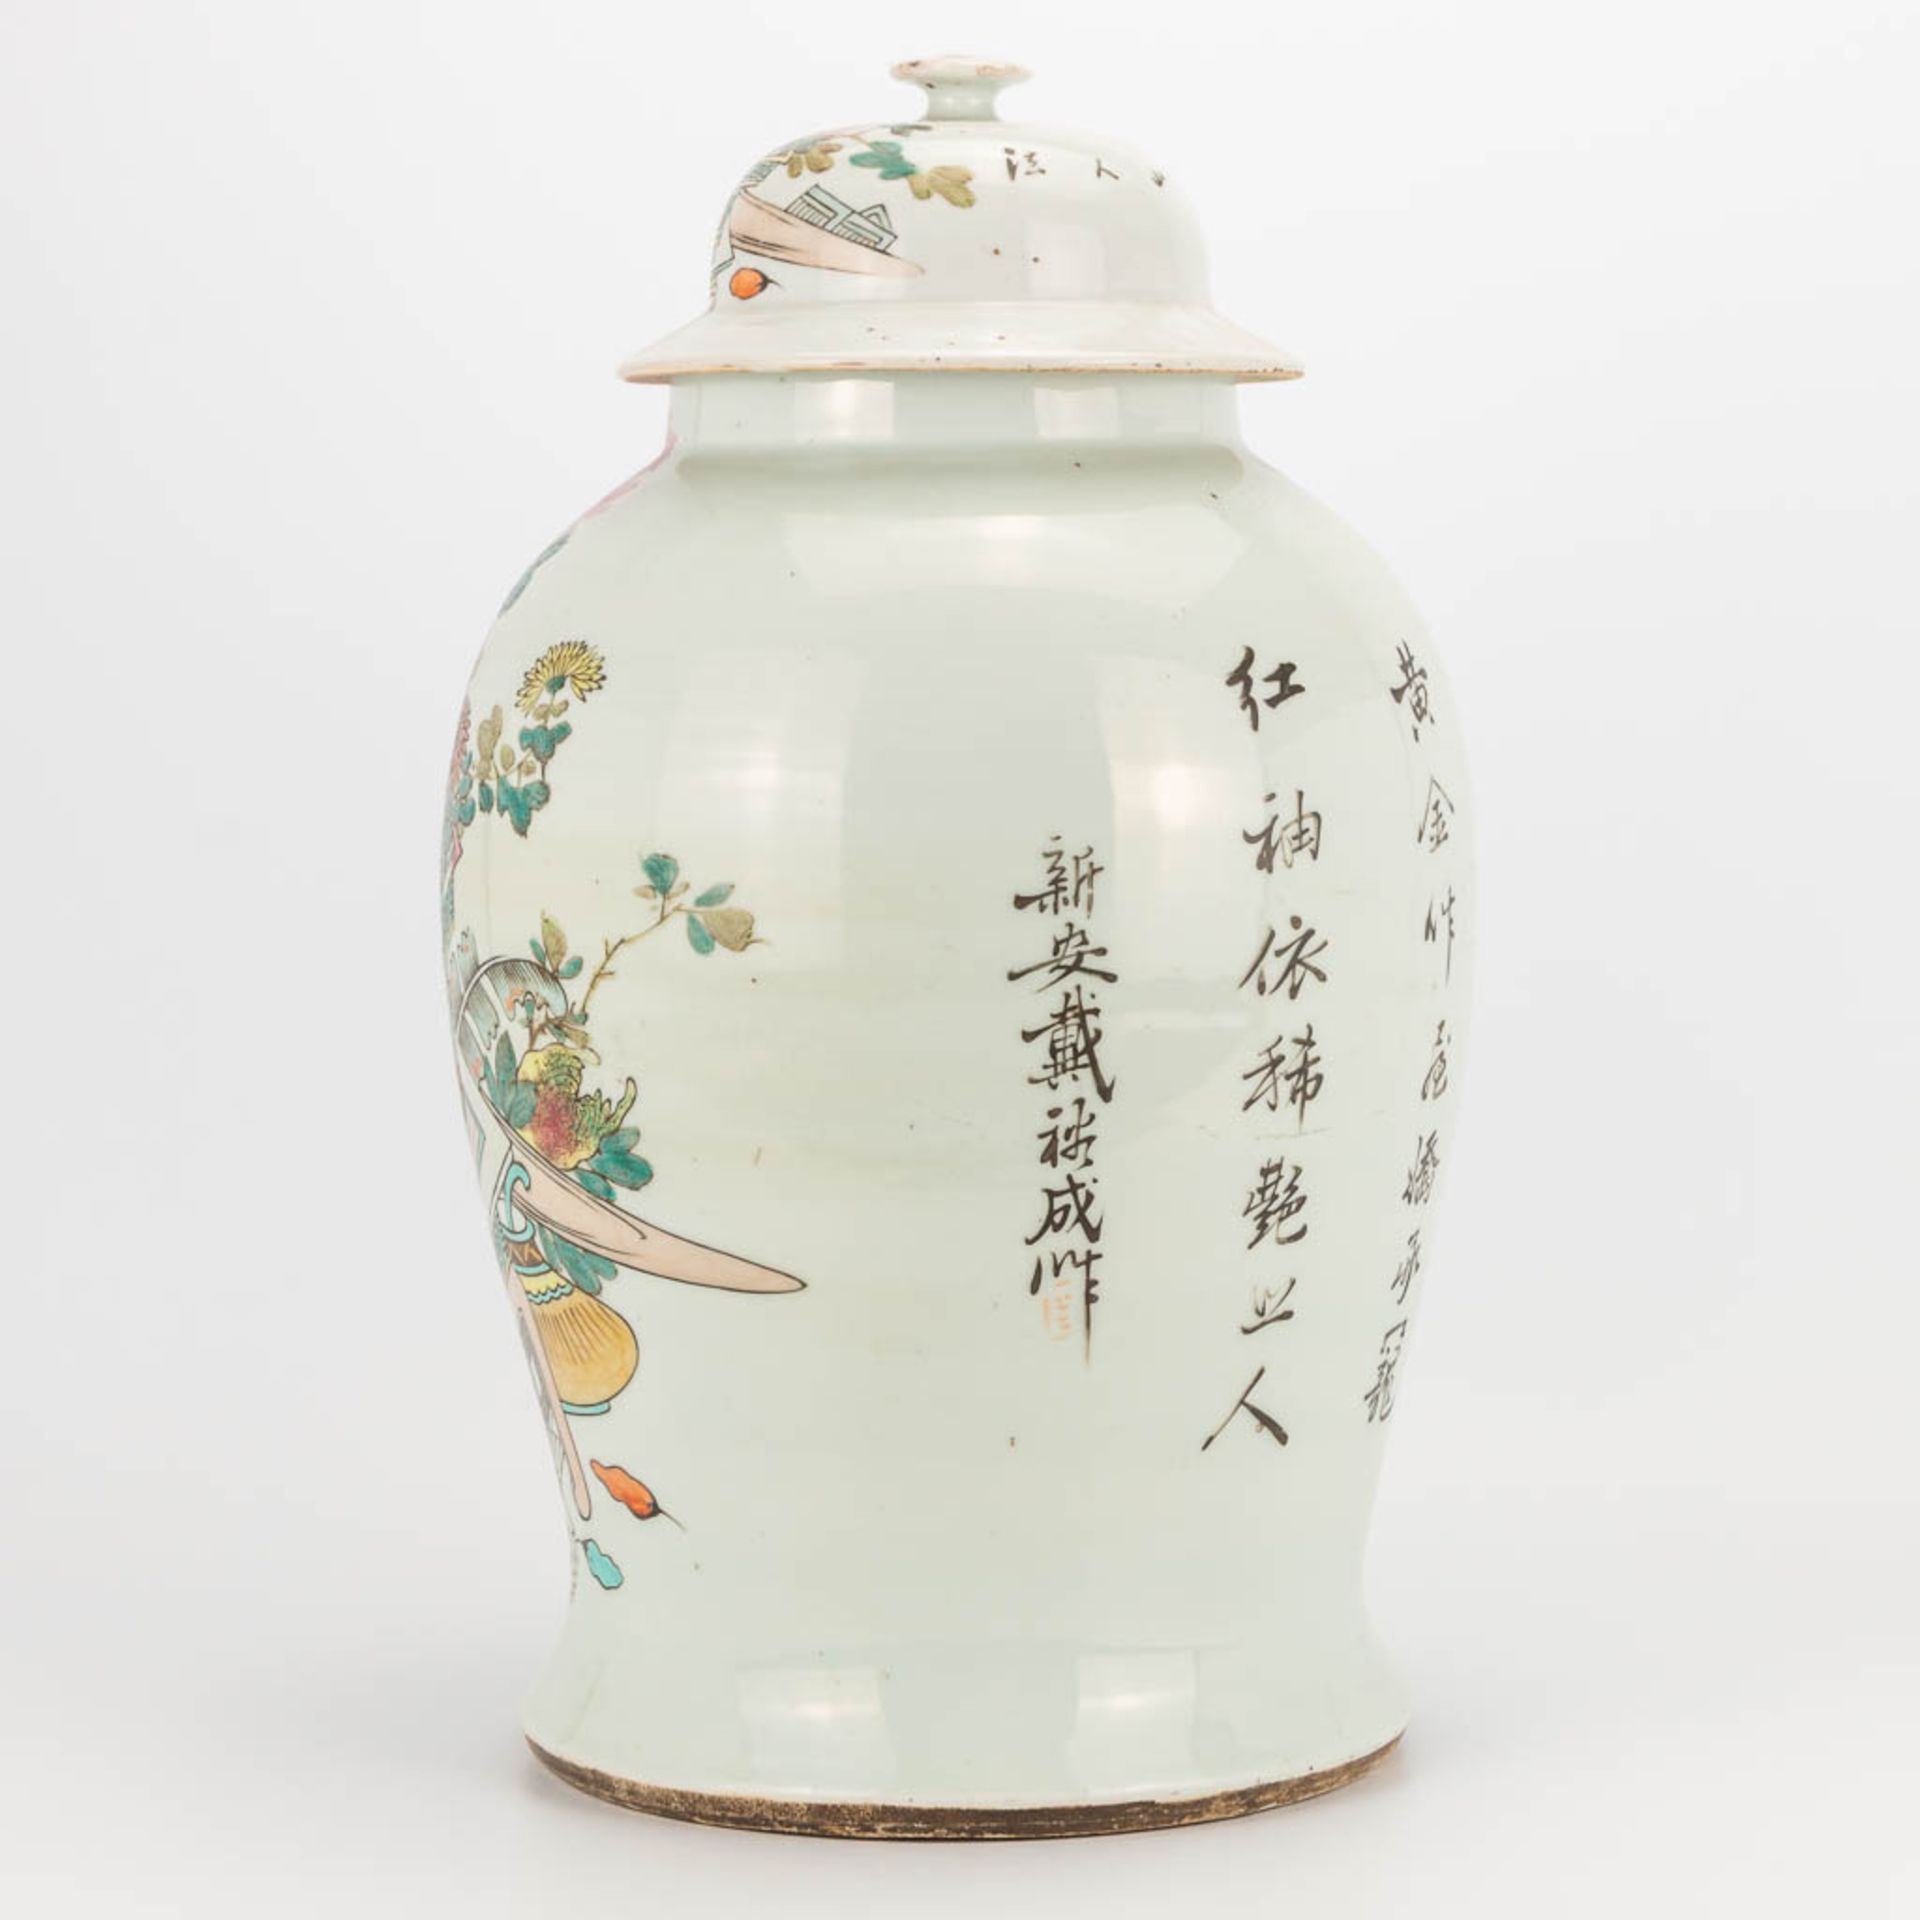 A Chinese porcelain vase with lid, decor of 100 antiquities. 19th/20th century. (43 x 27 cm) - Image 5 of 20